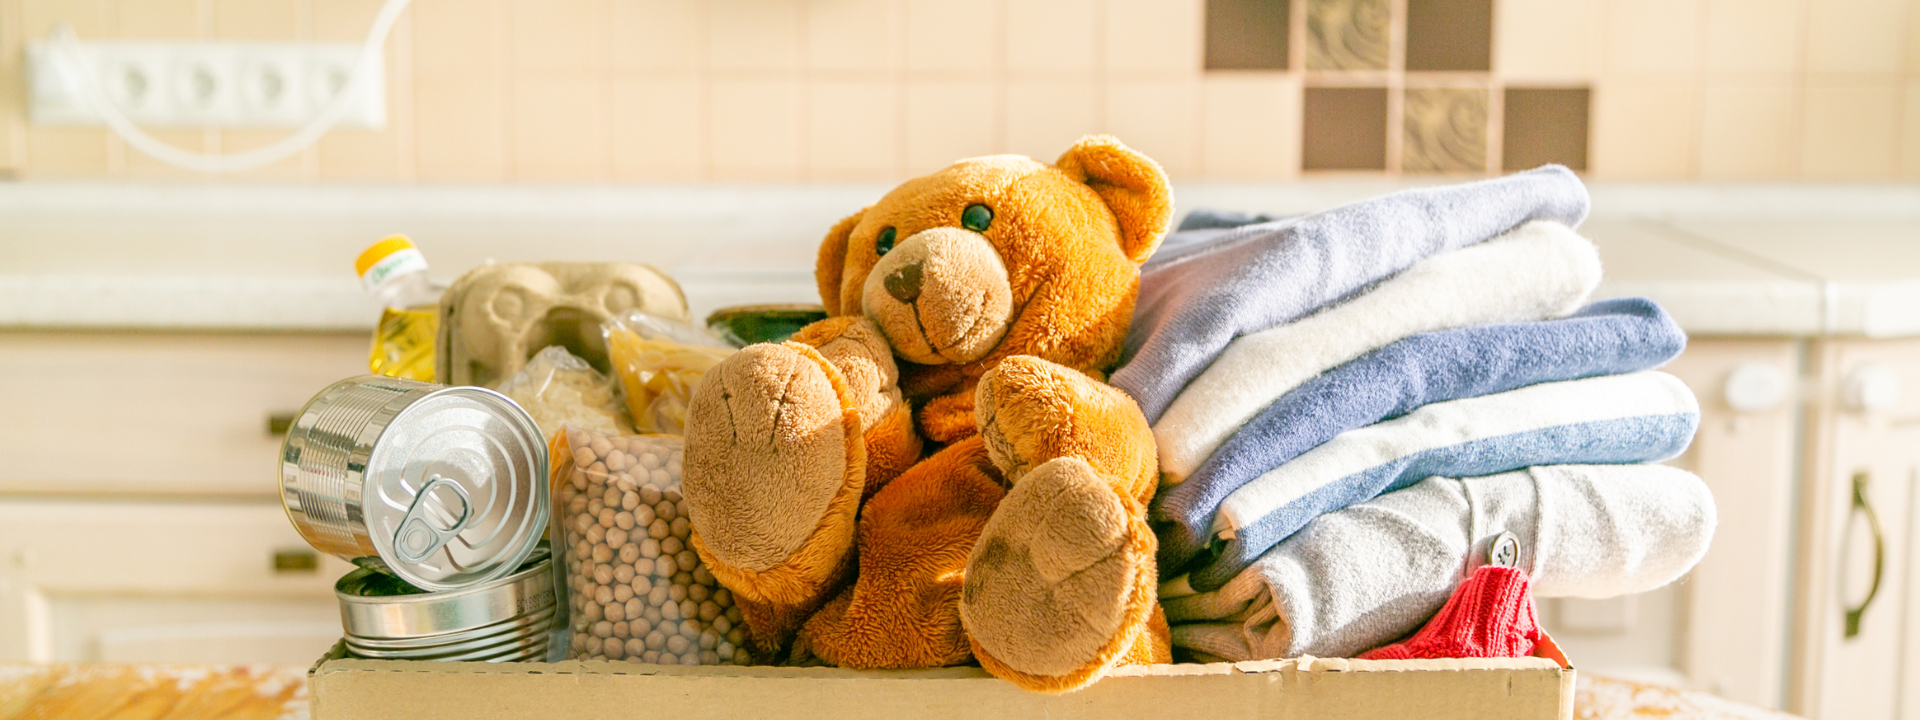 A brown teddy bear nestled in a pile of folded towels.